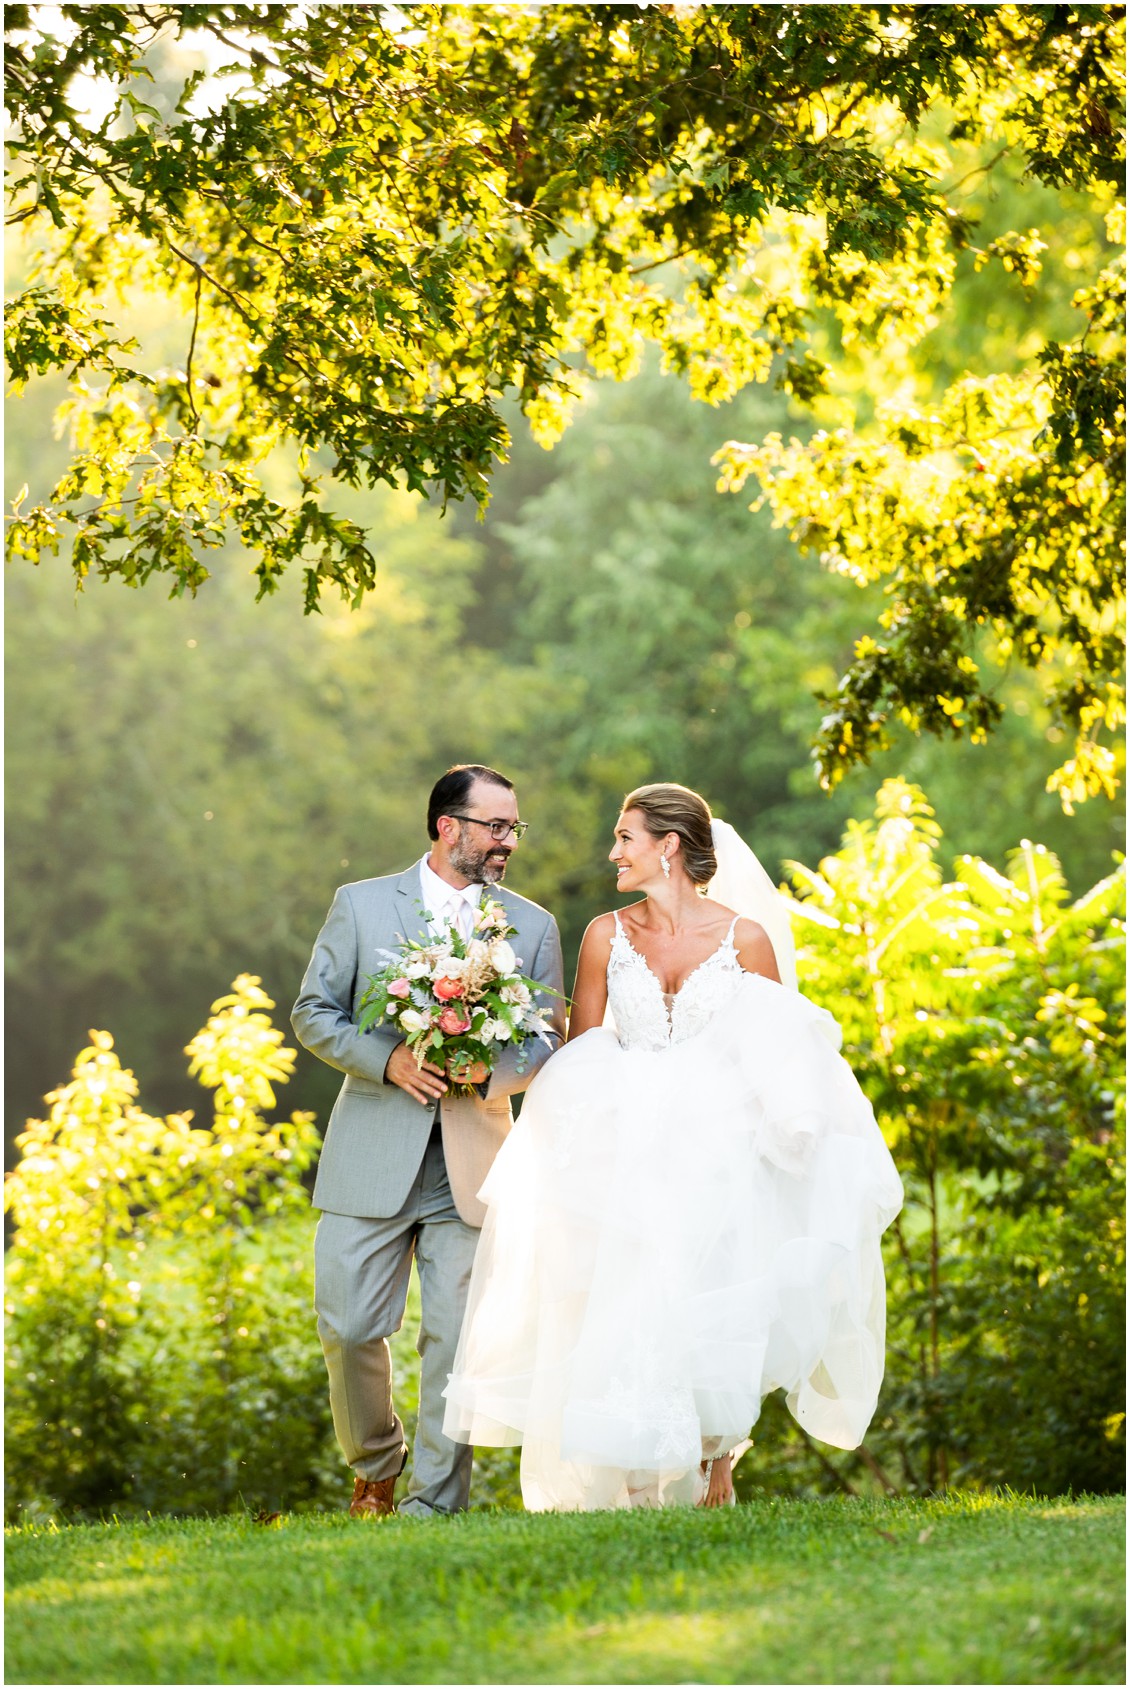 Bride and groom portrait at elegant and intimate at-home wedding | My Eastern Shore Wedding | Melissa Grimes-Guy Photography | Sweetbay Flowers